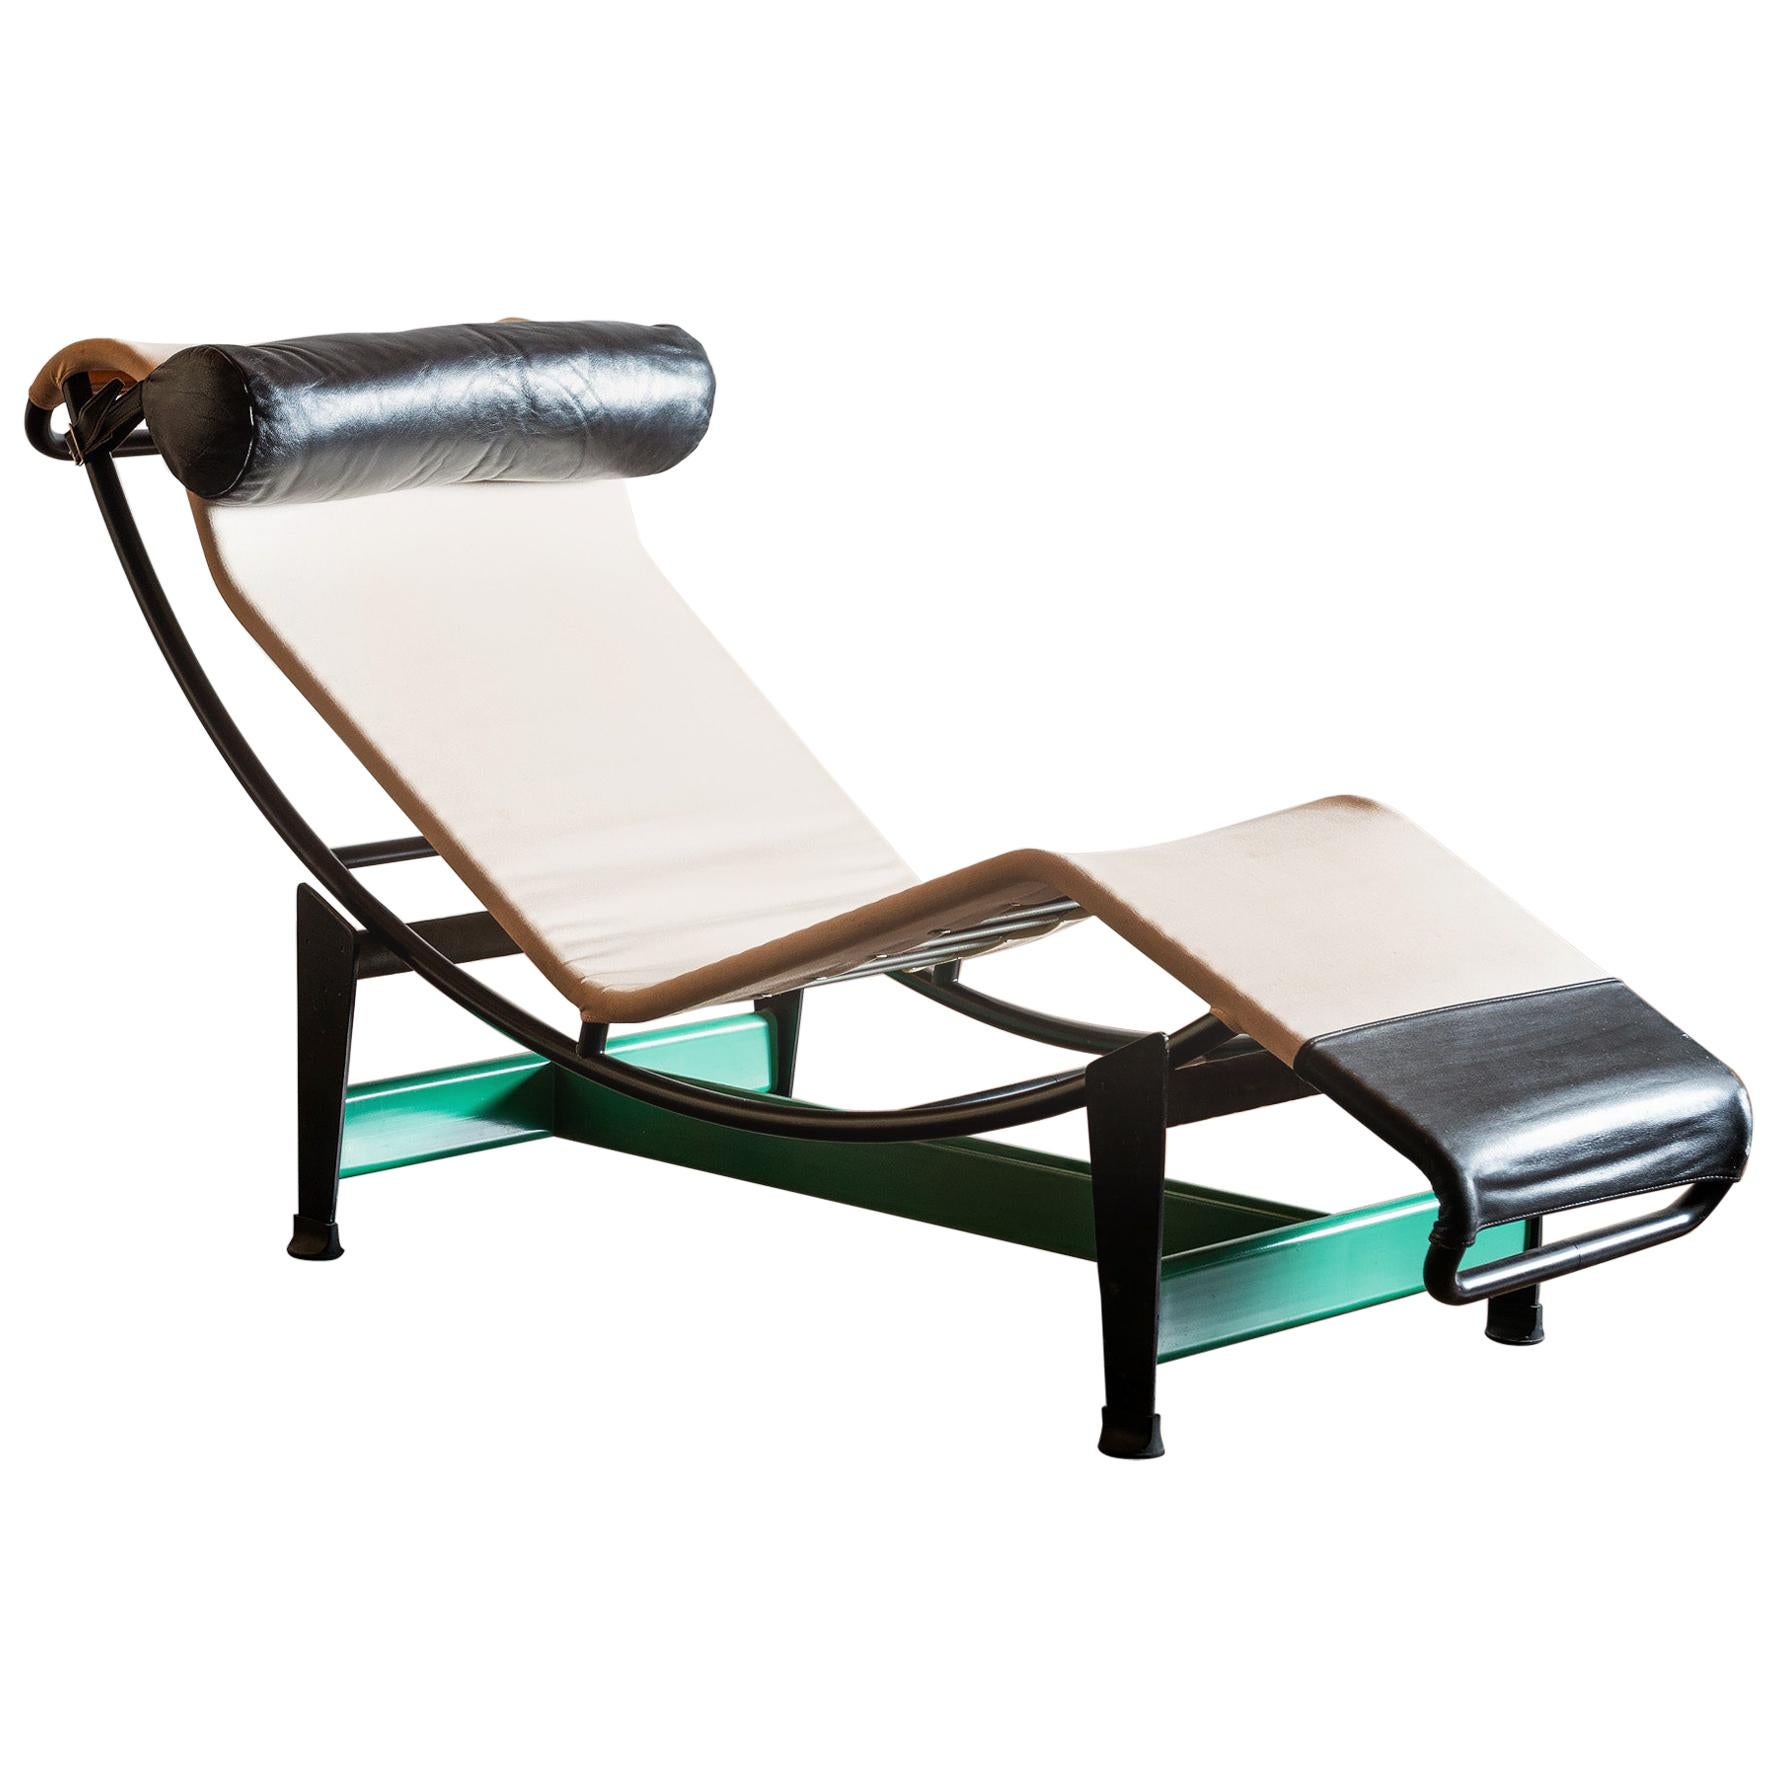 Cassina Re-edition Le Corbusier LC4 Chaise with Green Base